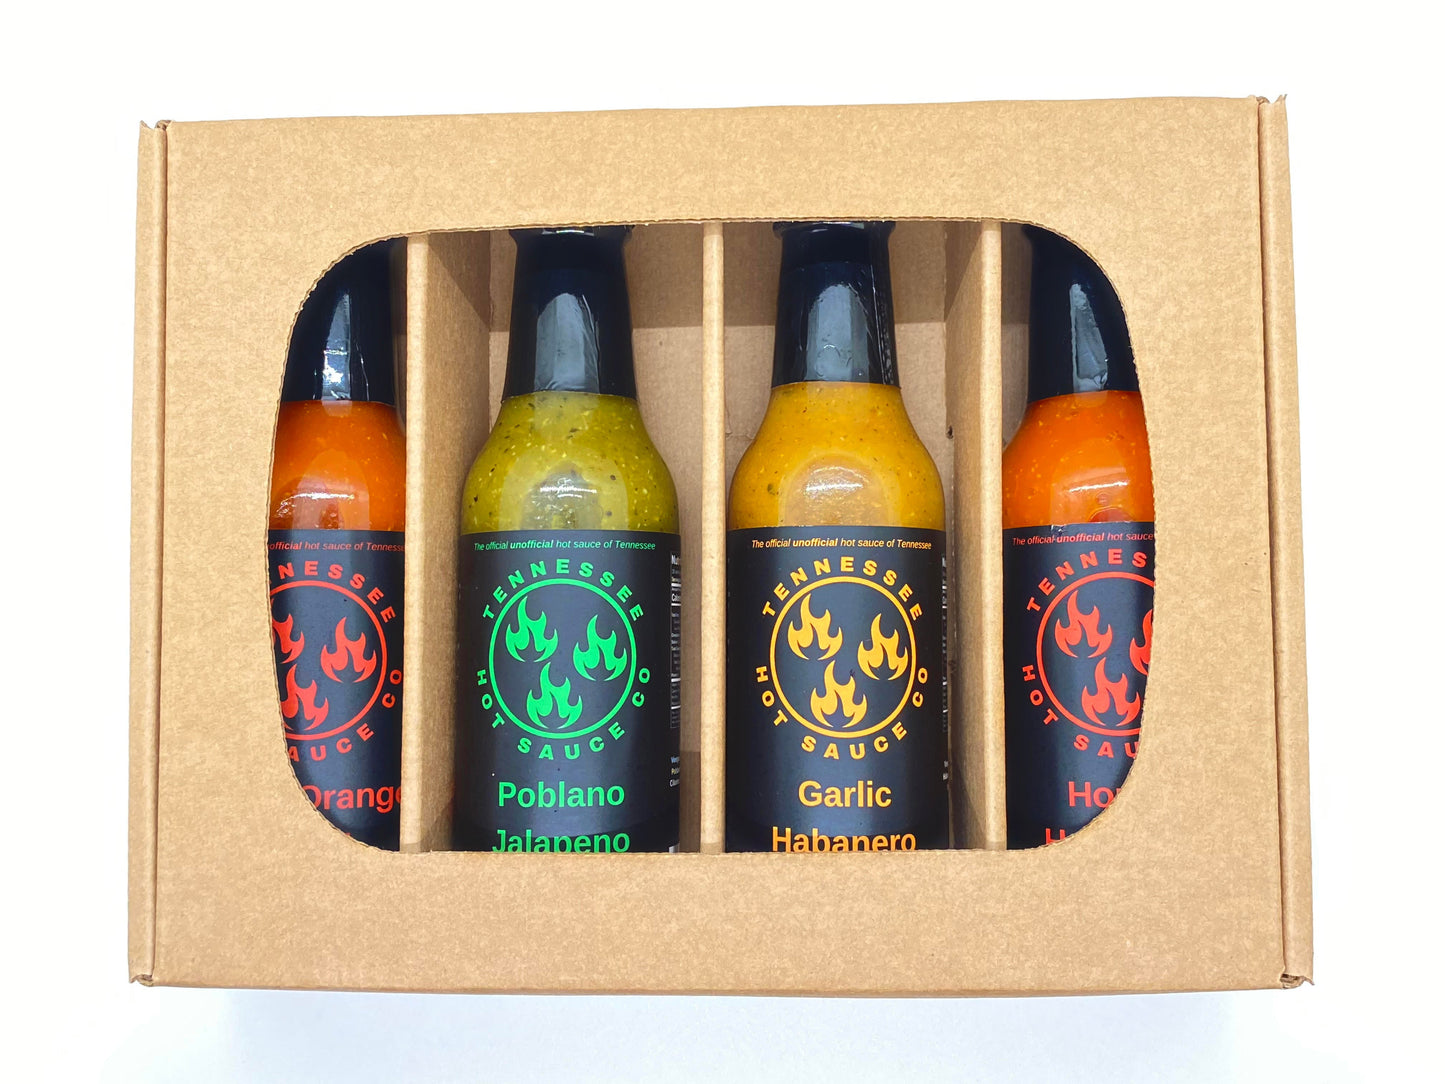 4 Bottle Hot Sauce Subscription - One Year Option